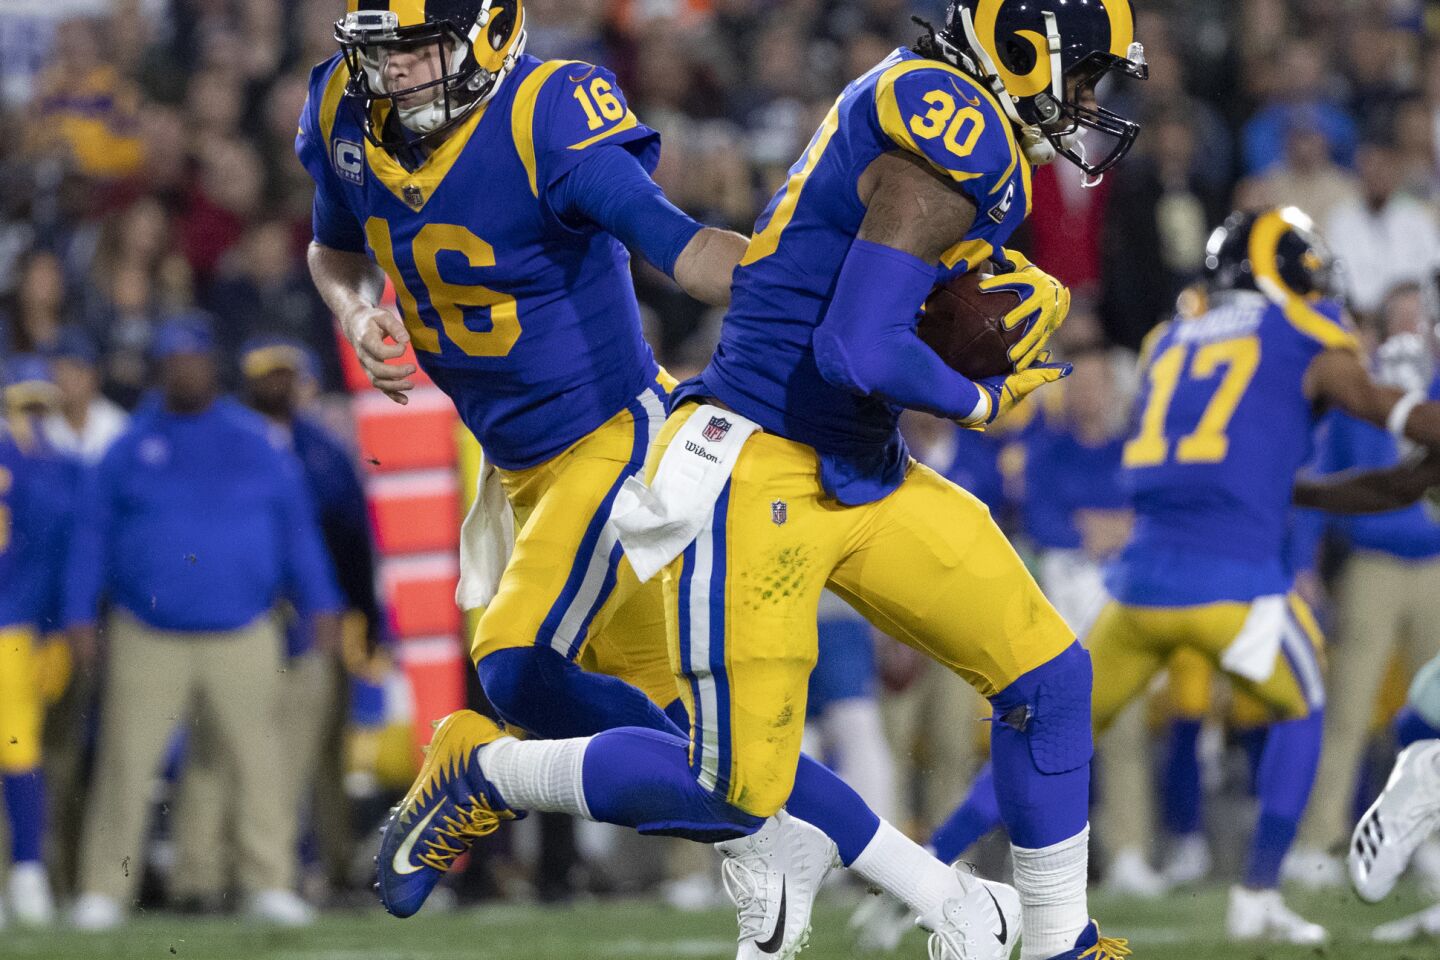 Rams quarterback Jared Goff (16) hands off to running back Todd Gurley (30) during the first half.